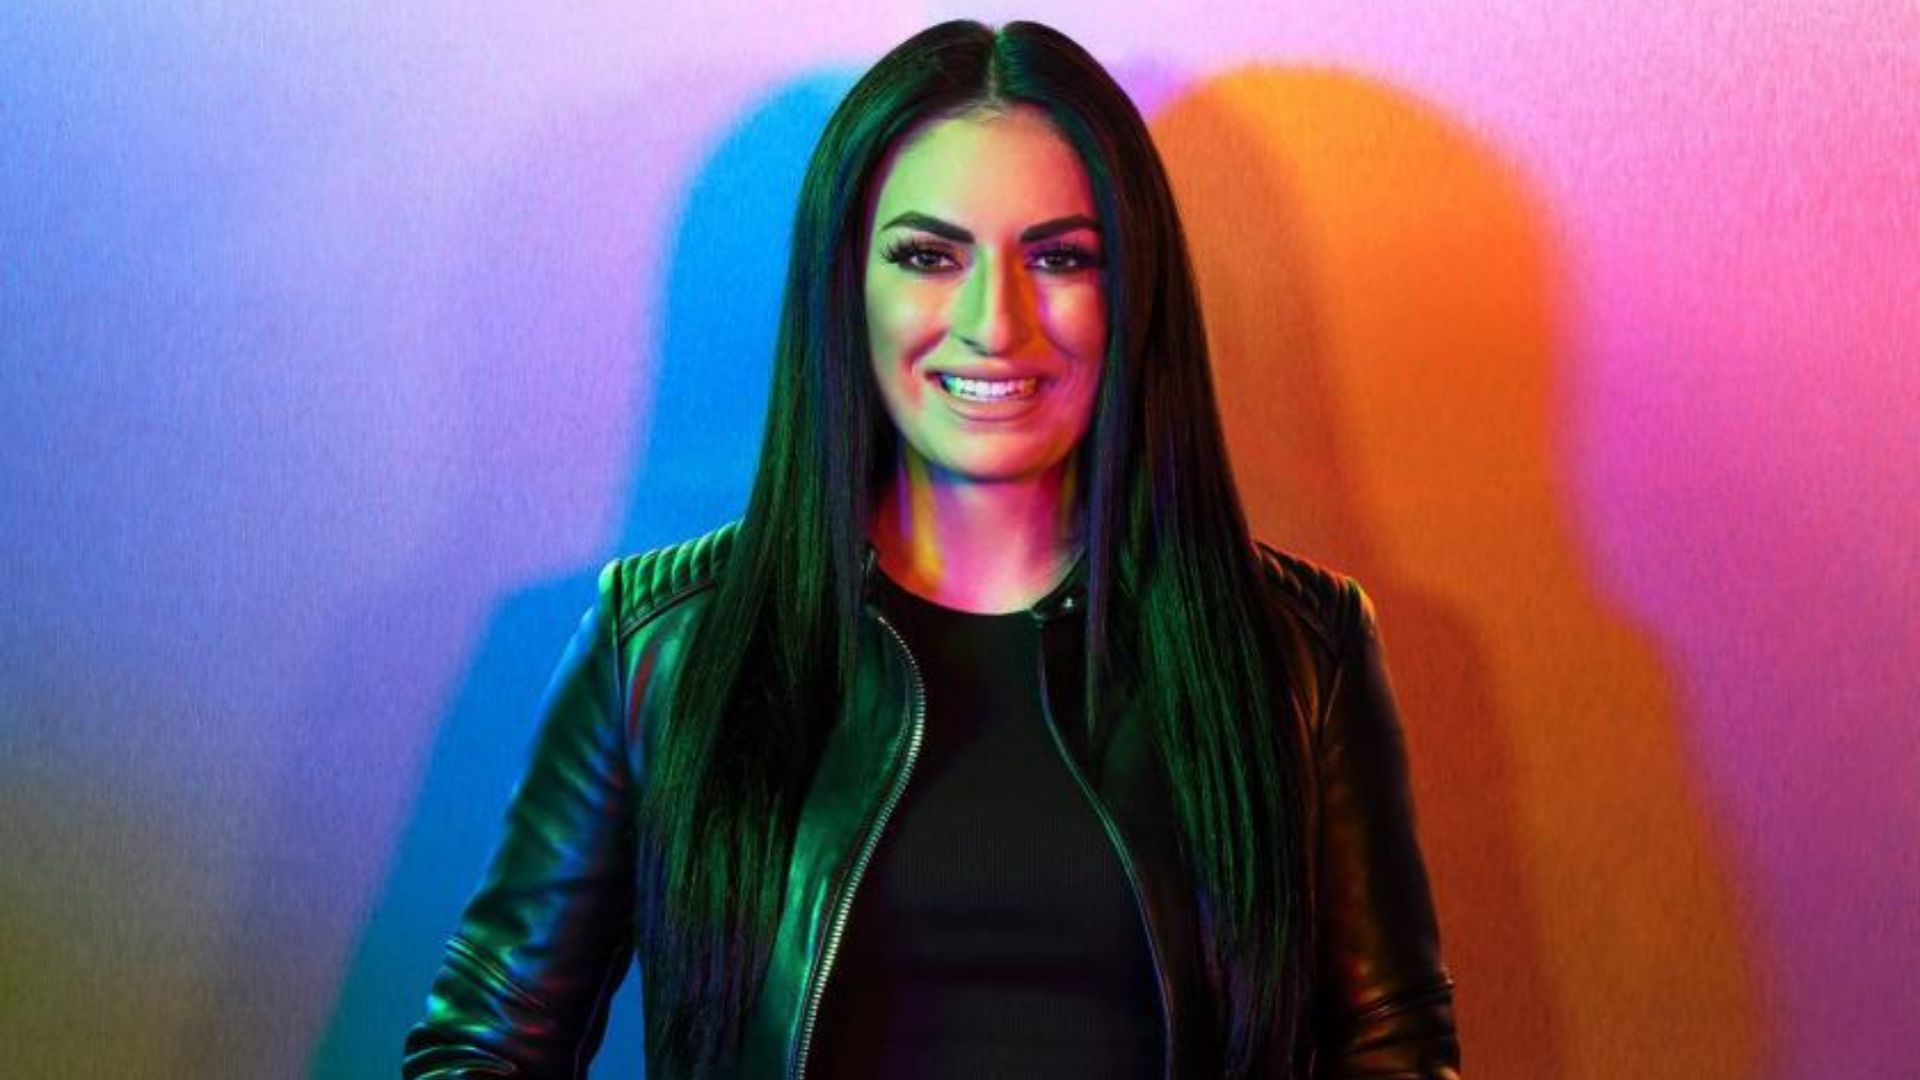 Sonya Deville is undoubtedly one of the most hardworking stars in WWE today.